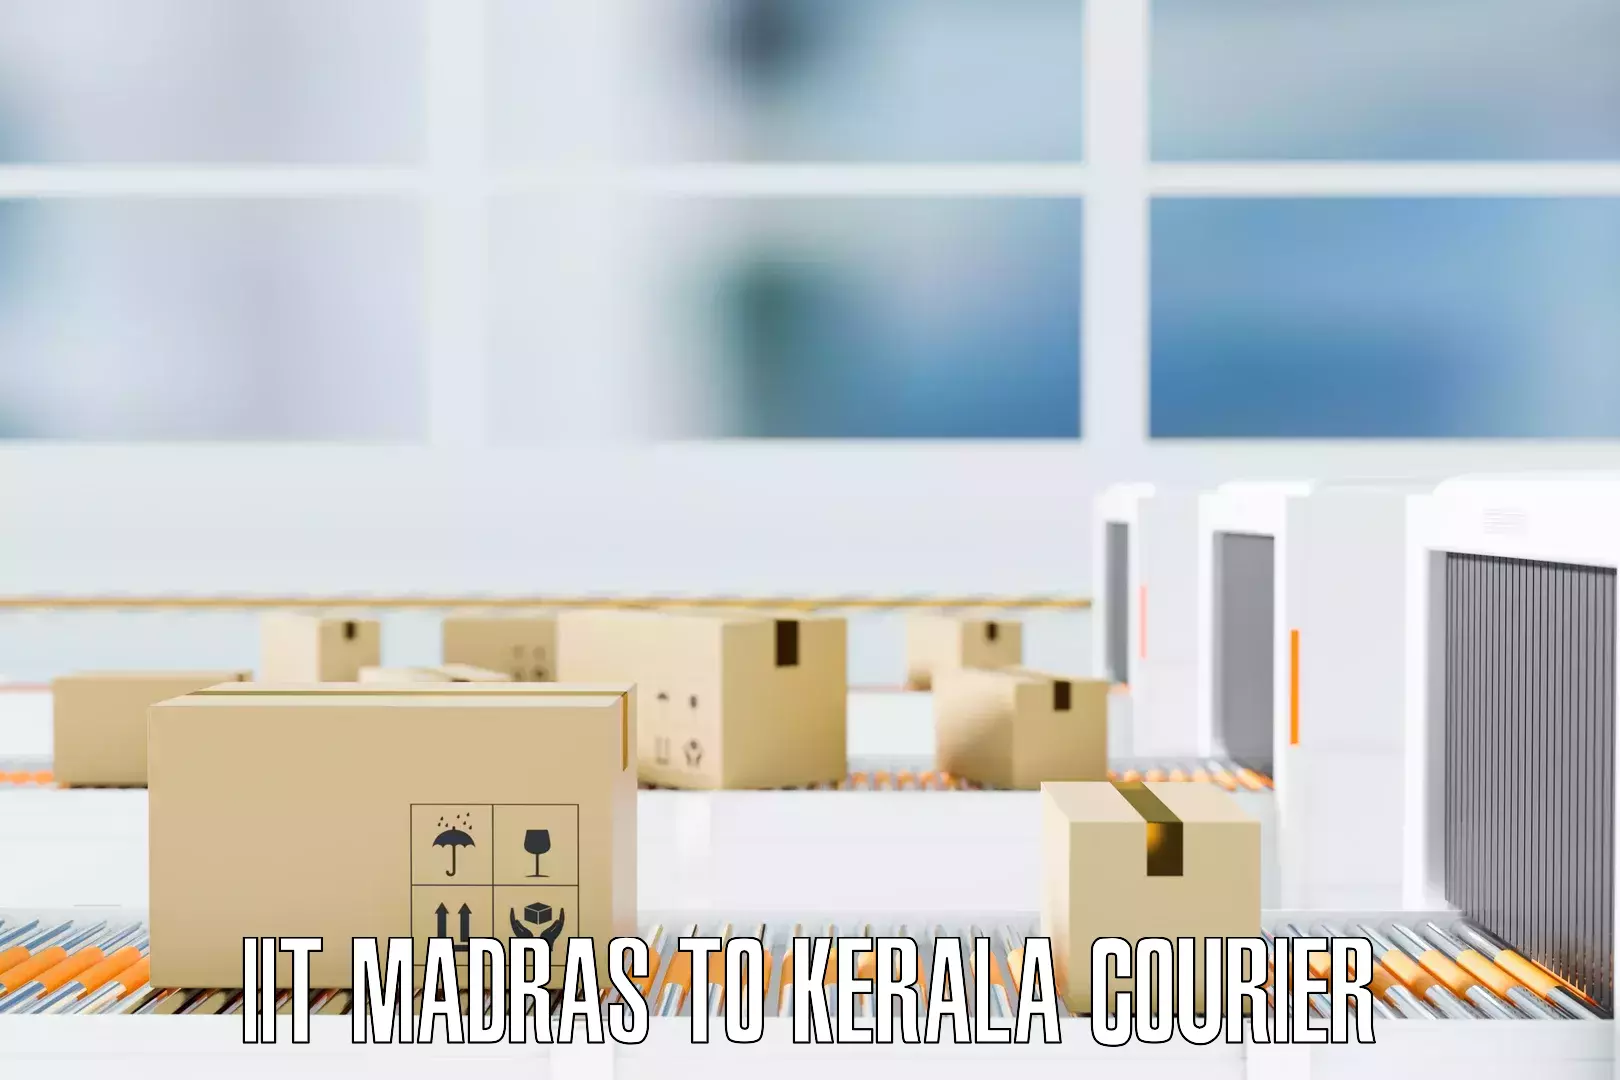 Professional packing services IIT Madras to Cochin Port Kochi